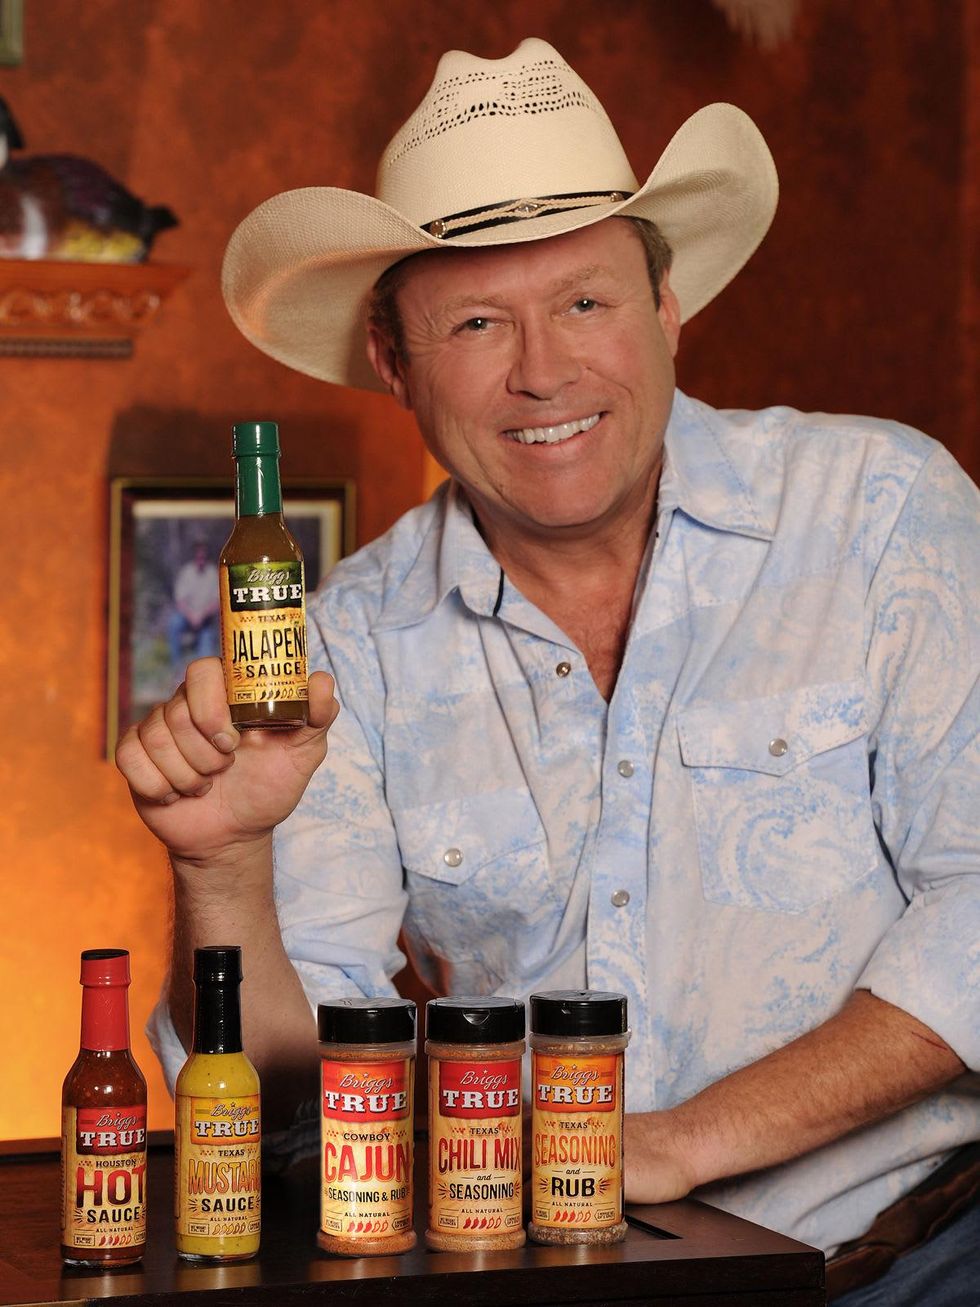 H-E-B bag Primo Picks - Quest for Texas Best August 2014 Michael Brigg's True seasonings and sauces